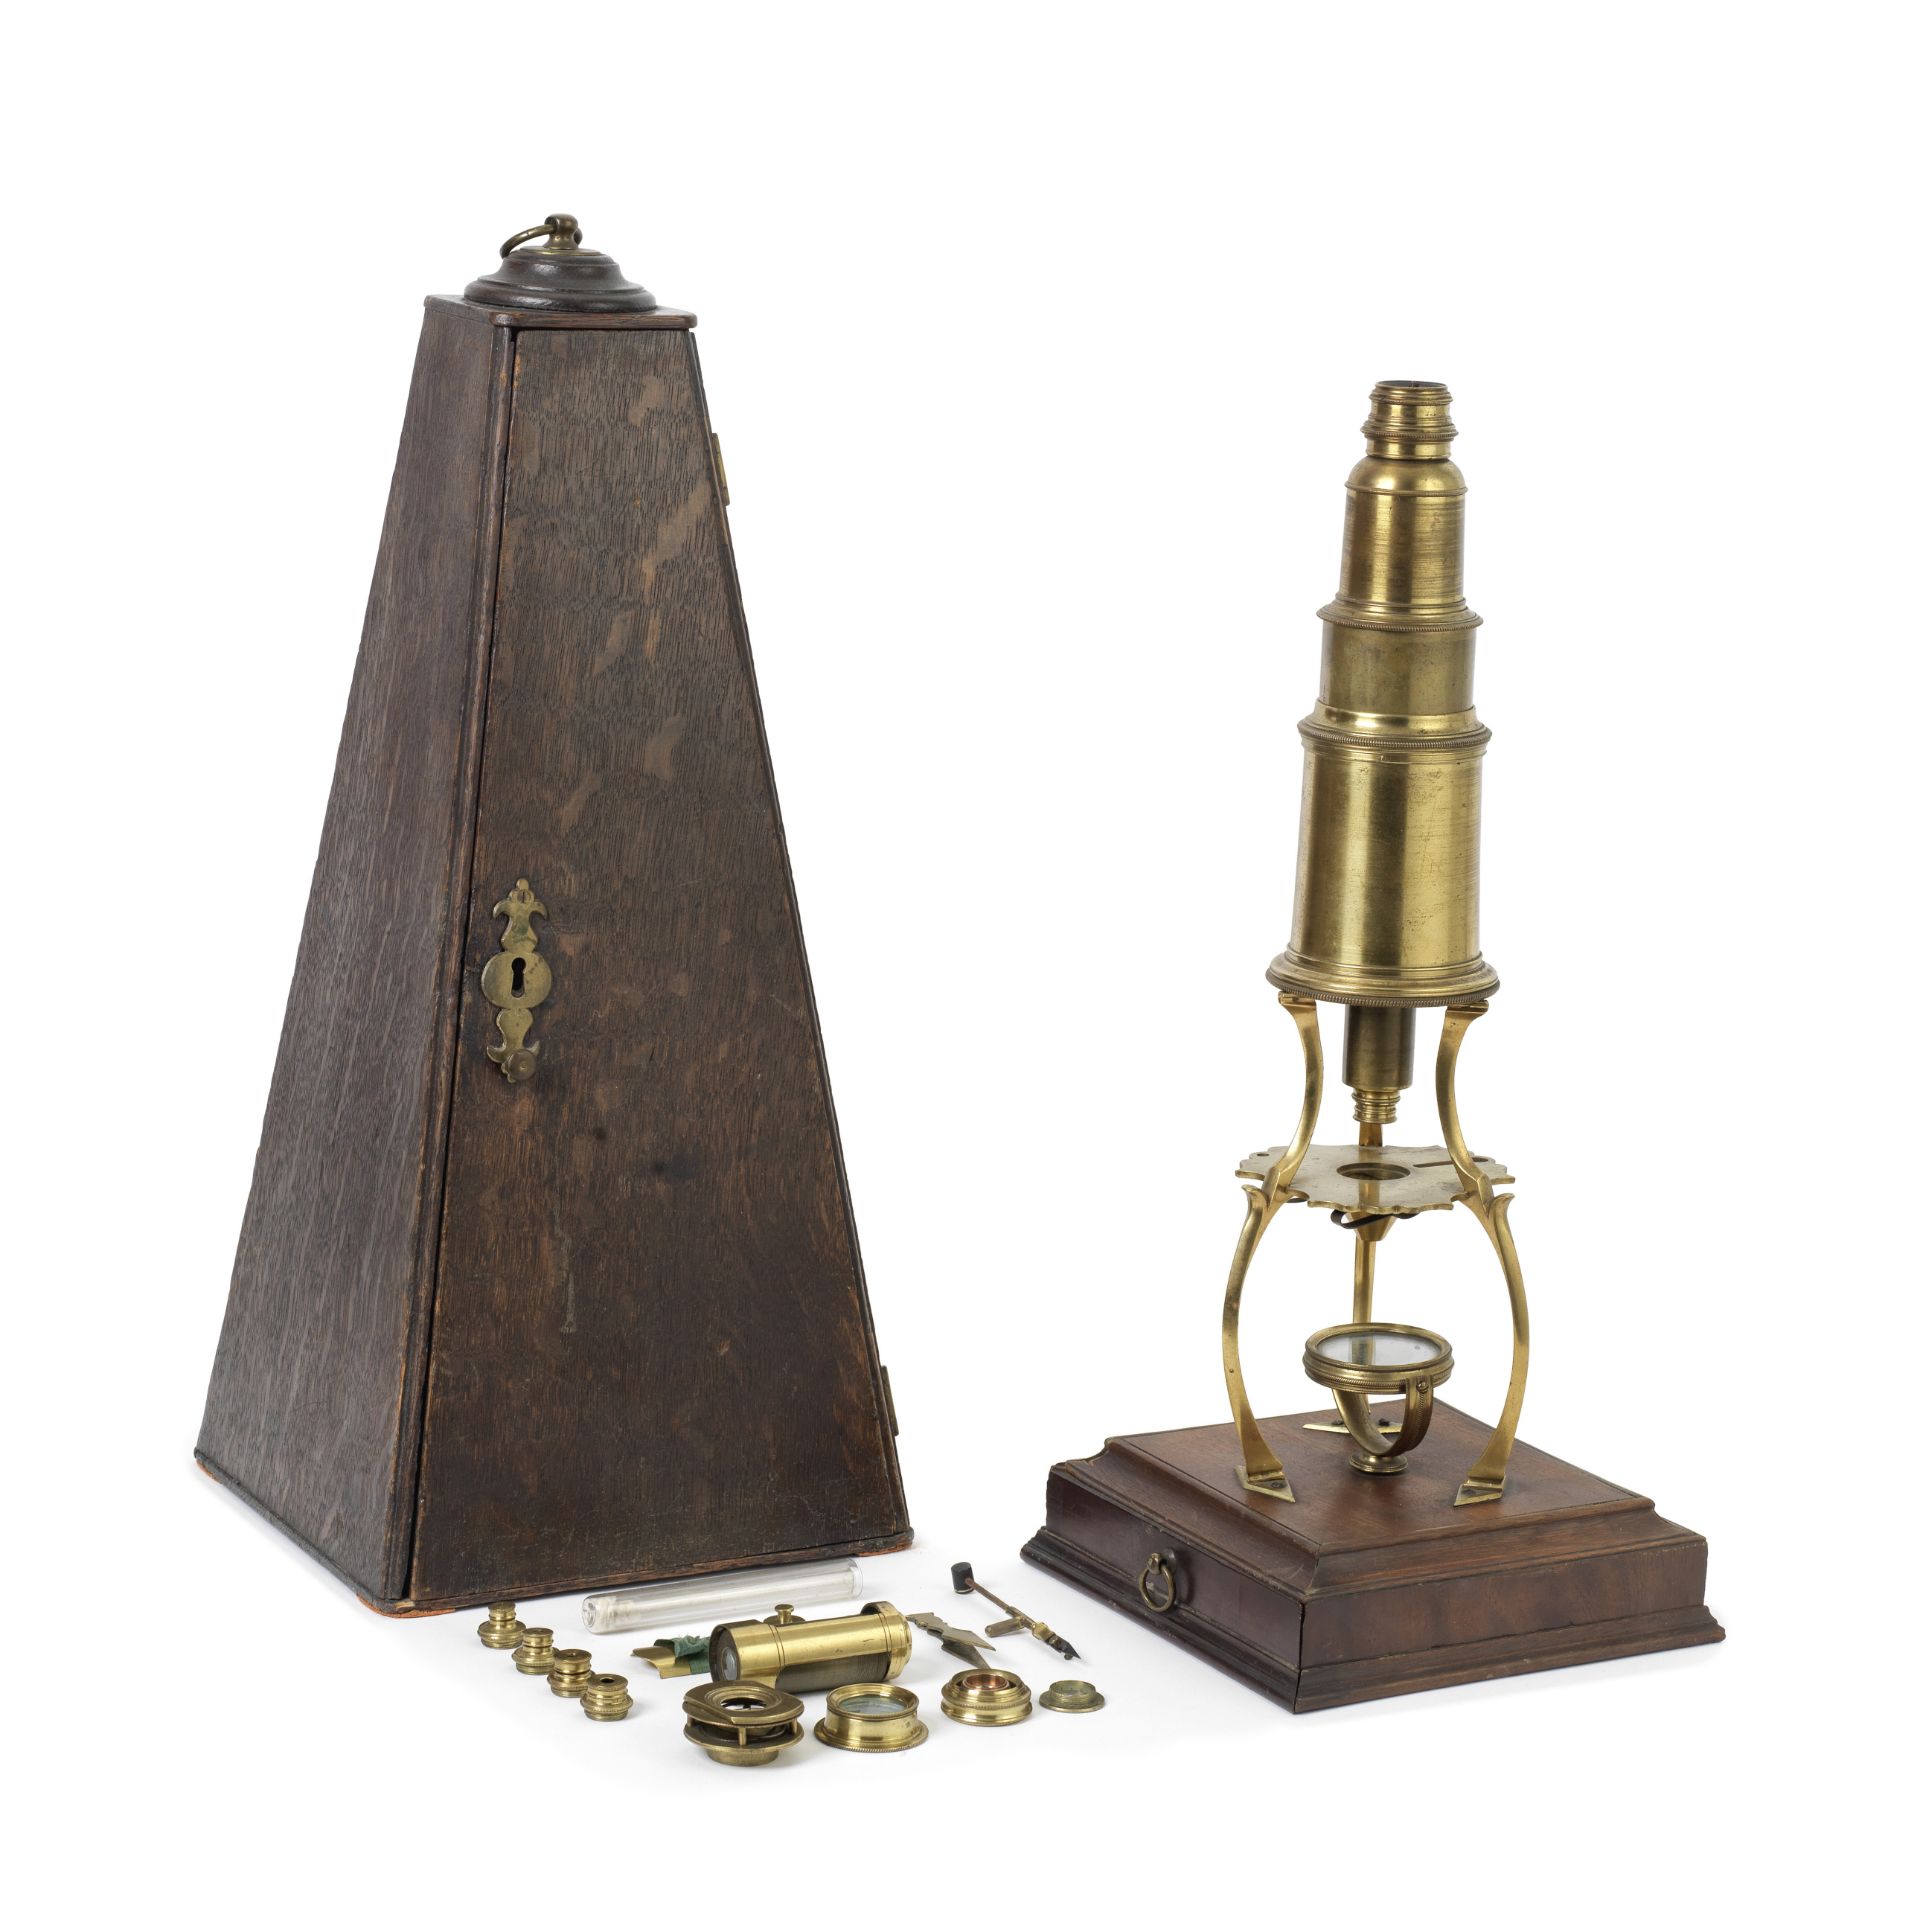 A Culpeper-type brass monocular microscope attributed to George Sterrop, English, mid-18th century,